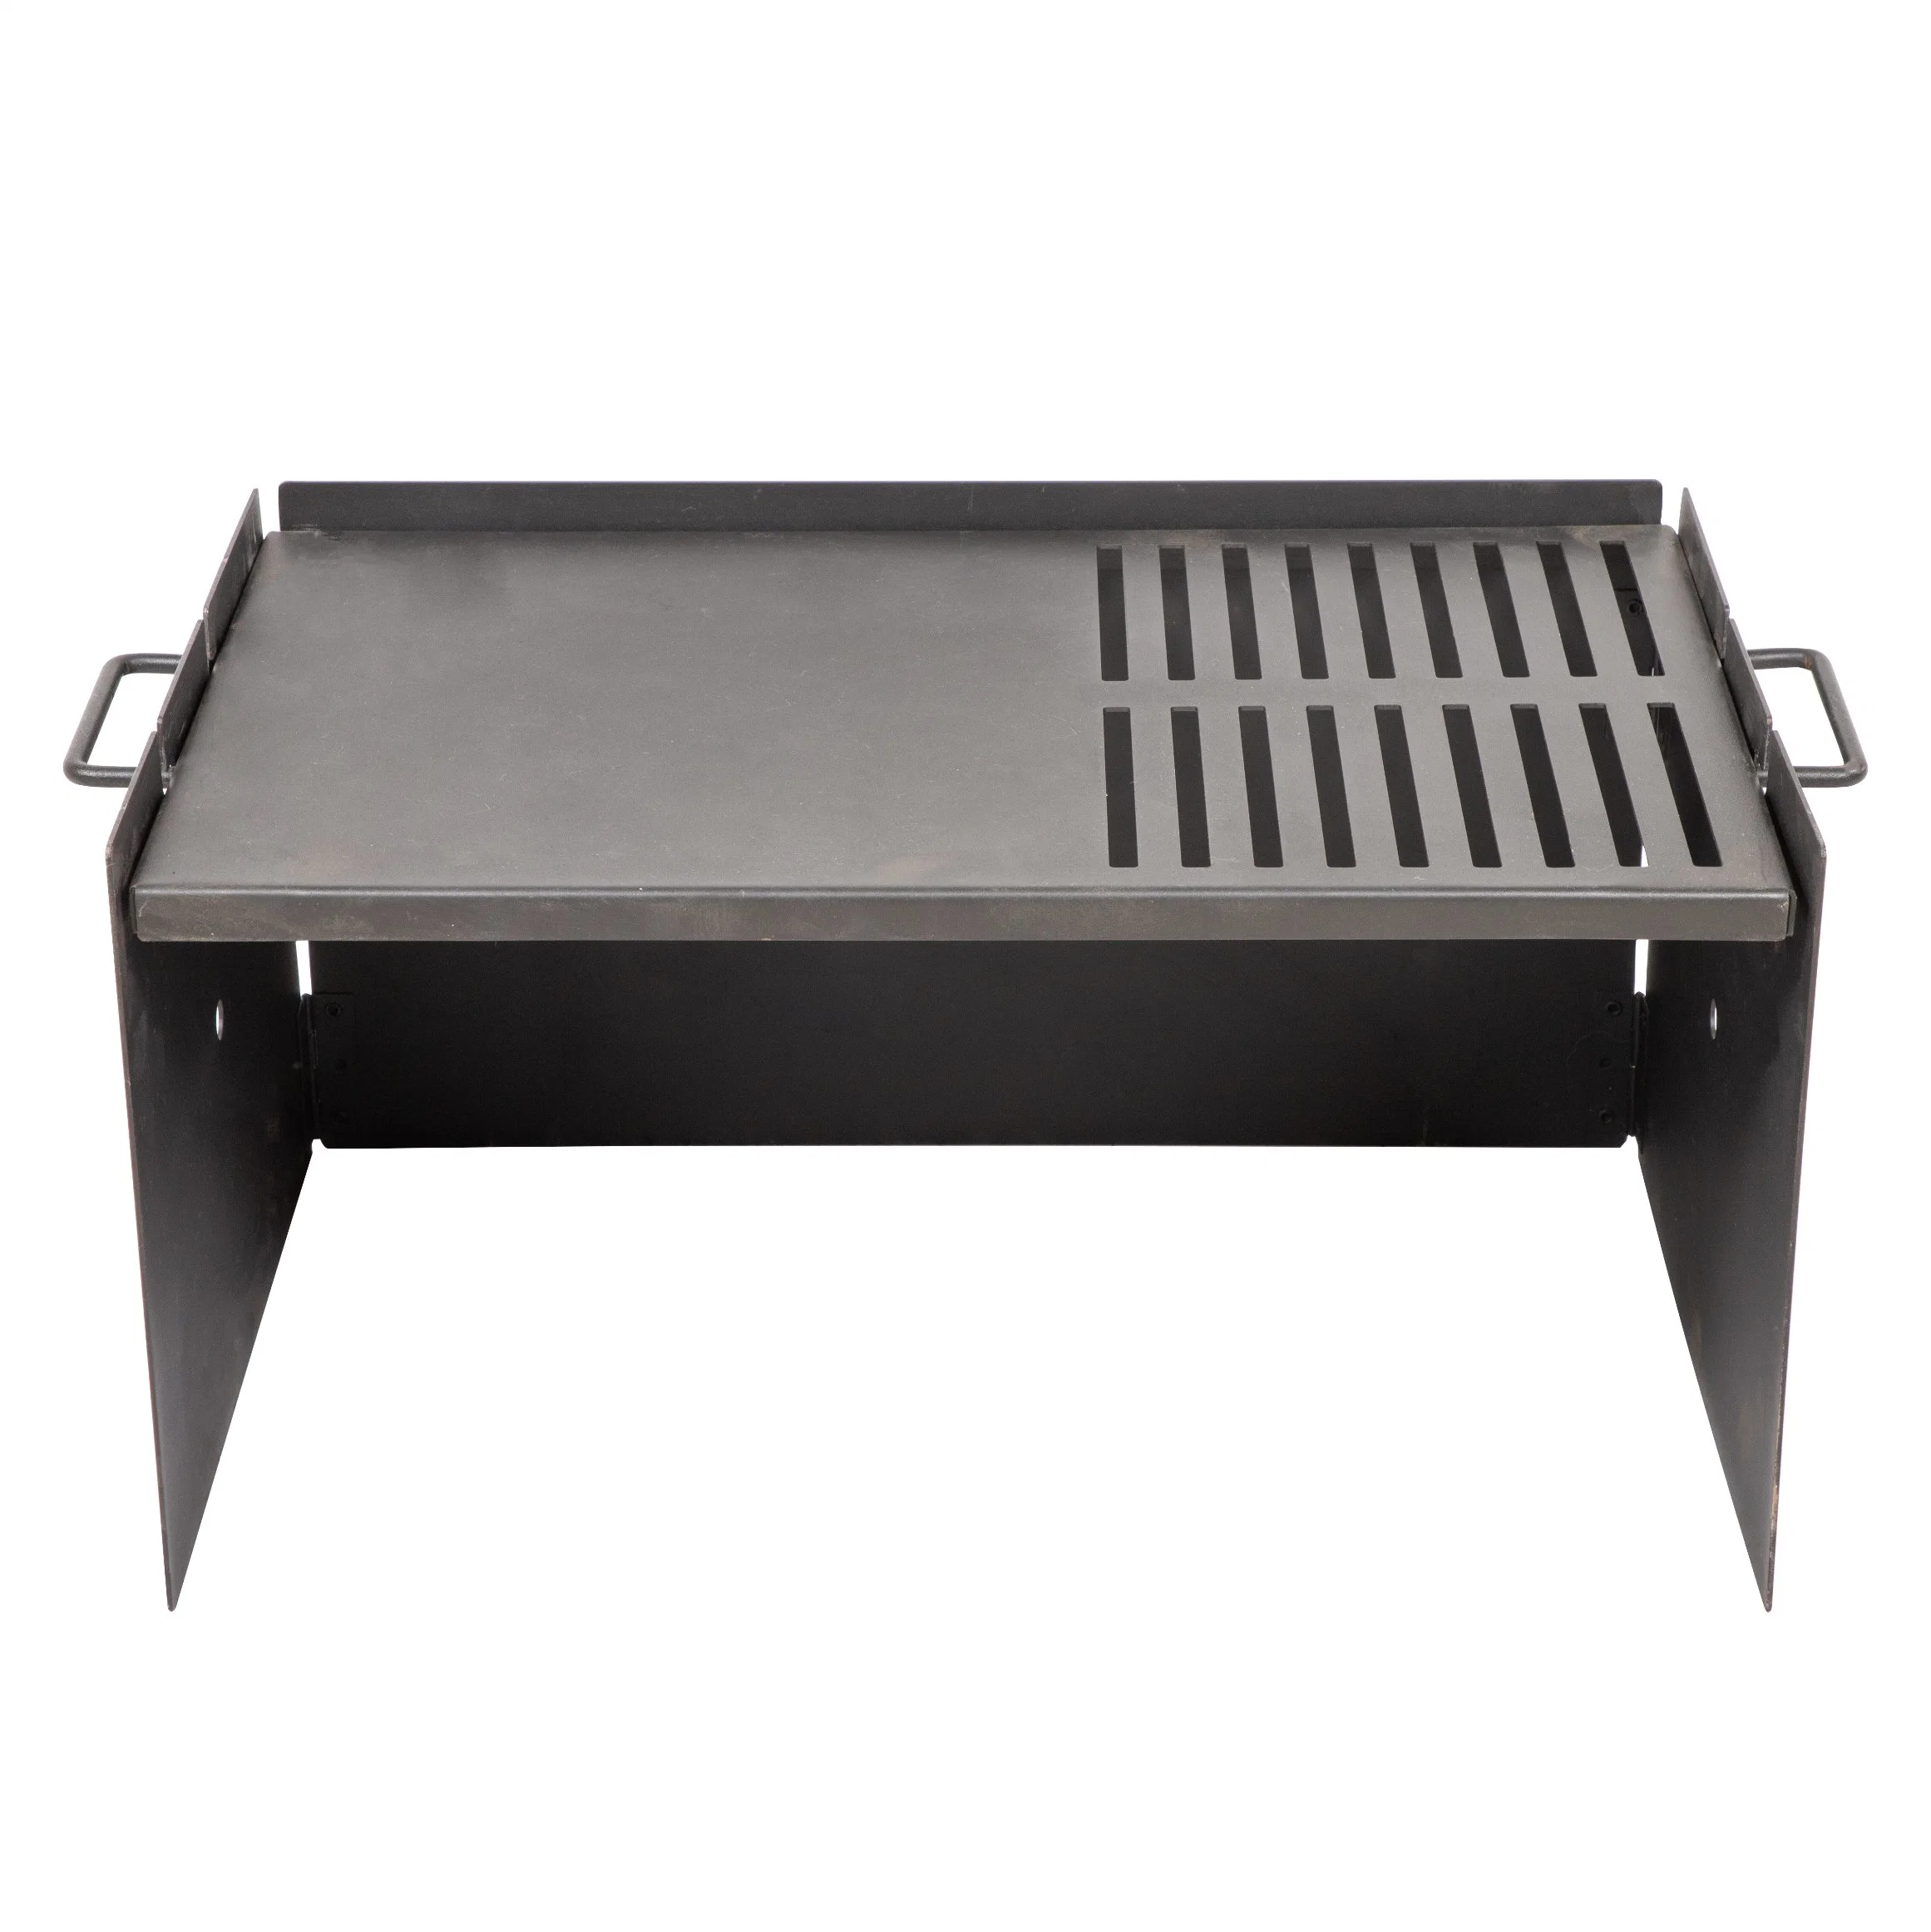 Metal Square BBQ Grill Wood Burning Charcoal Grill with Handle